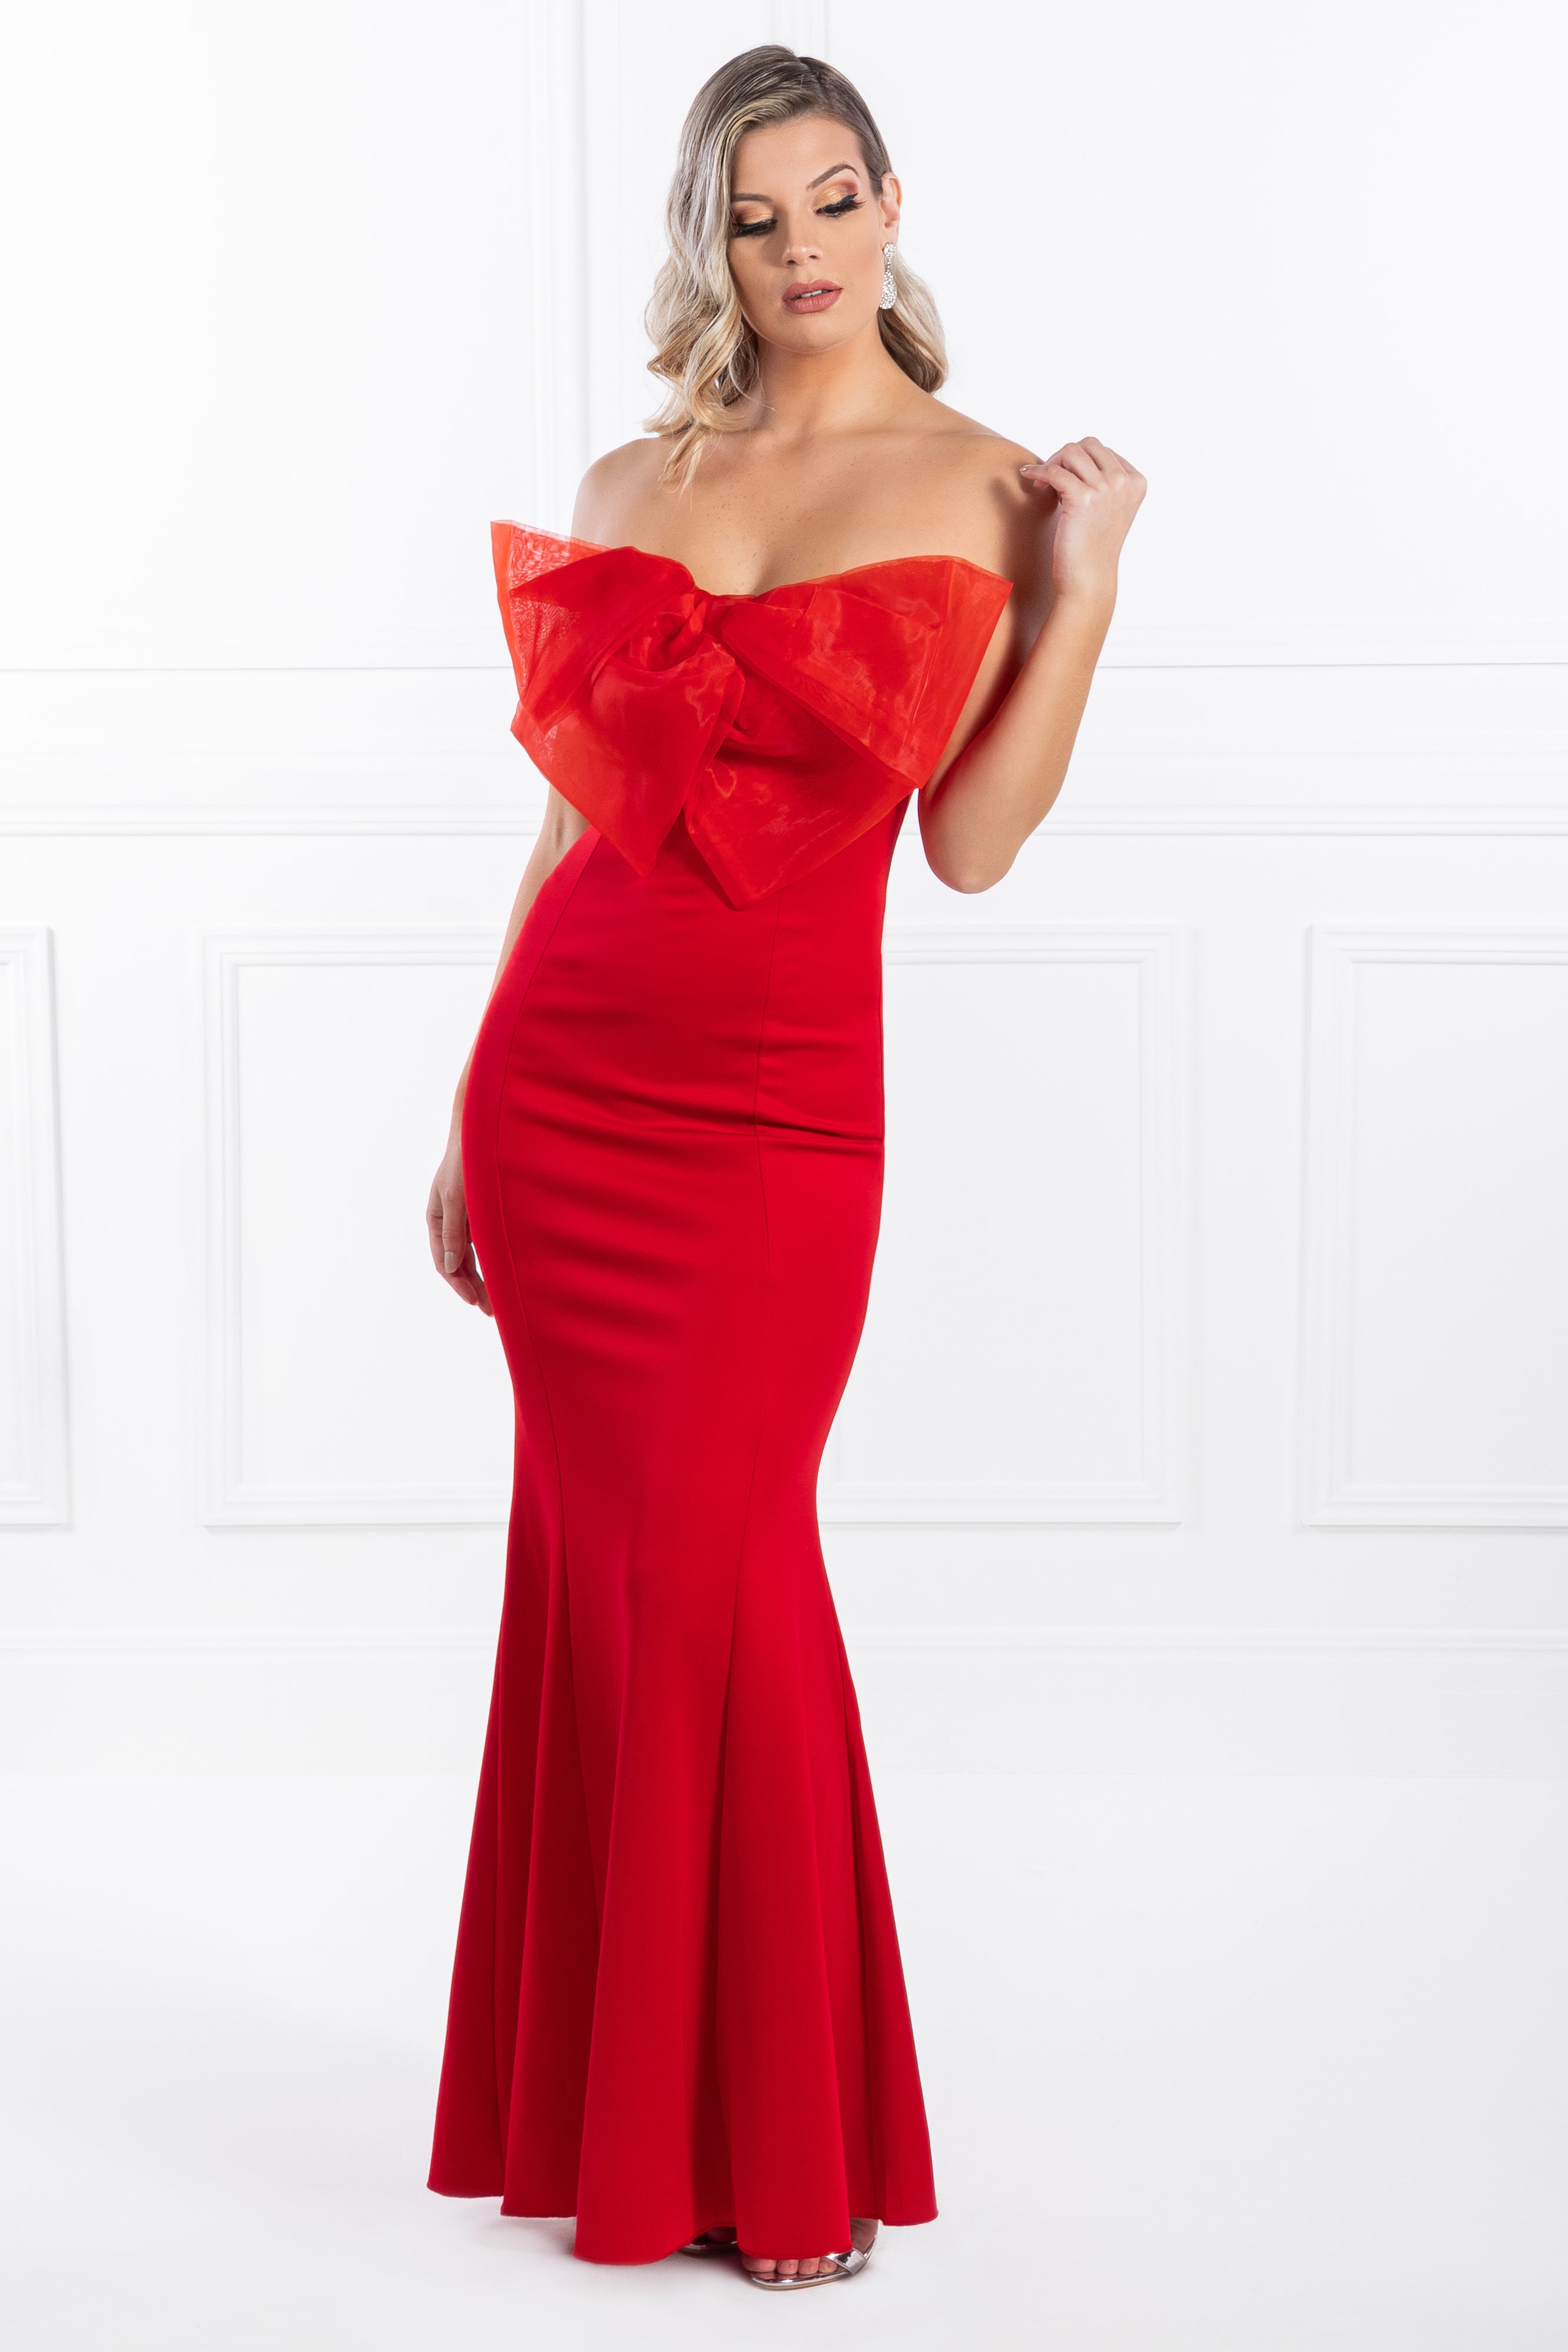 Honey Couture FREJA Red Bow Strapless Evening Gown Dress